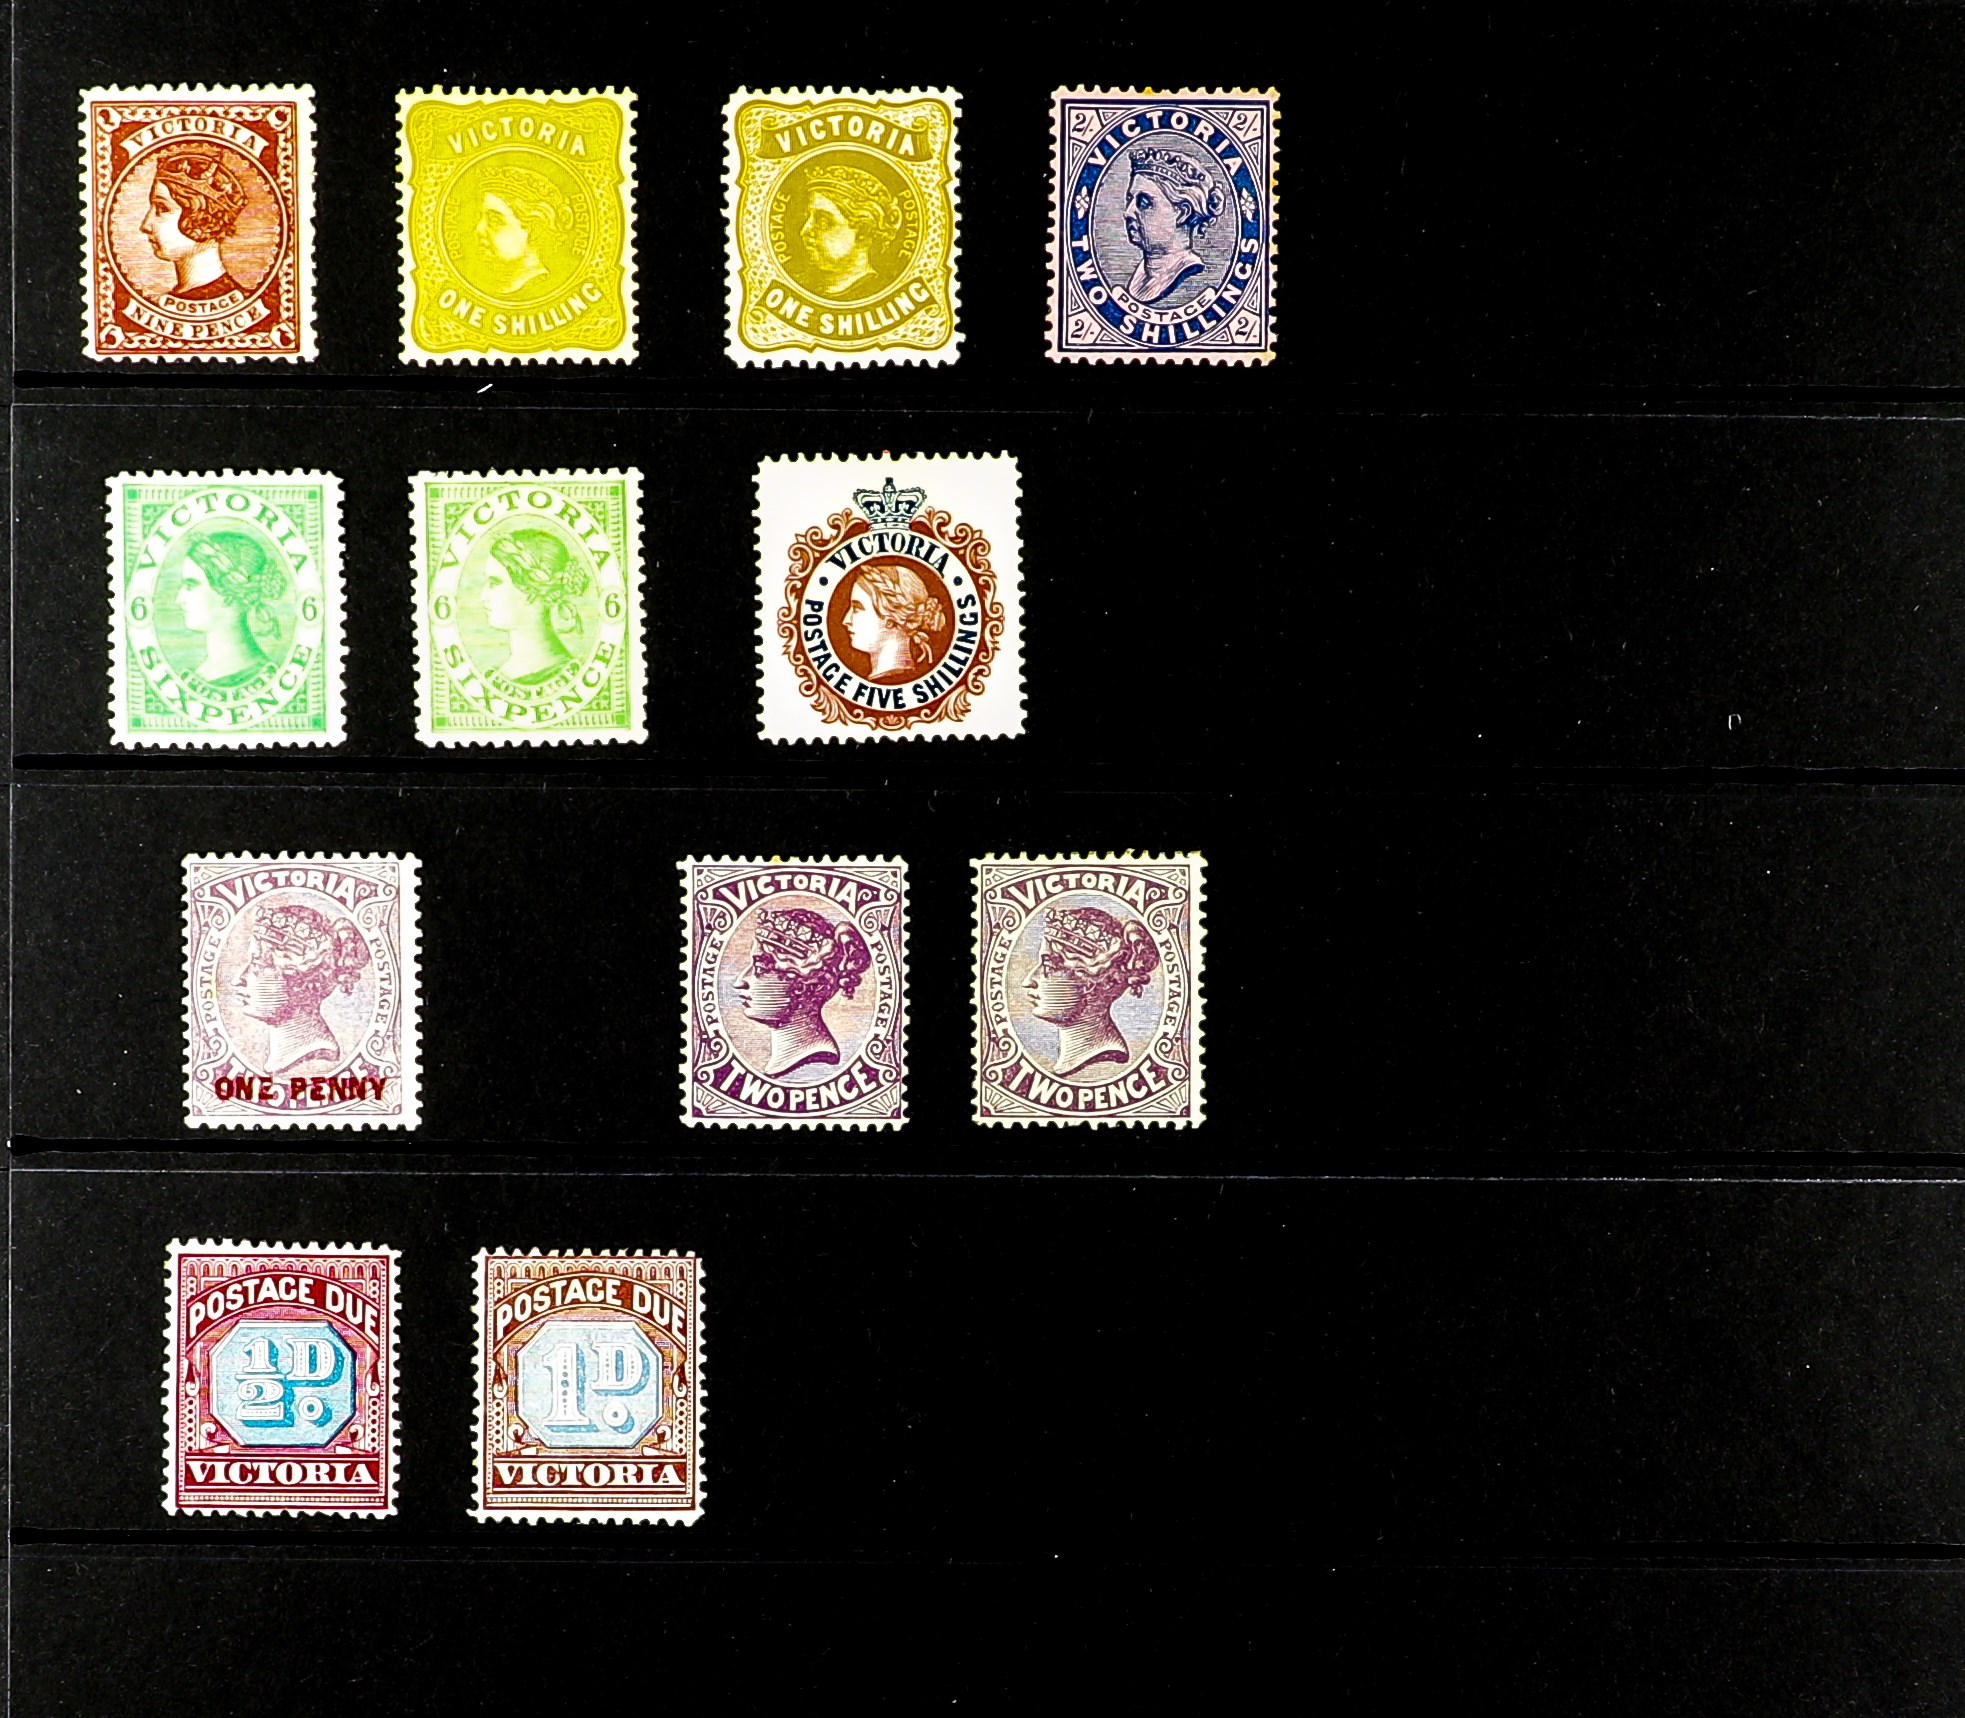 AUSTRALIAN STATES VICTORIA 1886 - 1913 MINT COLLECTION of over 45 stamps on protective pages, note